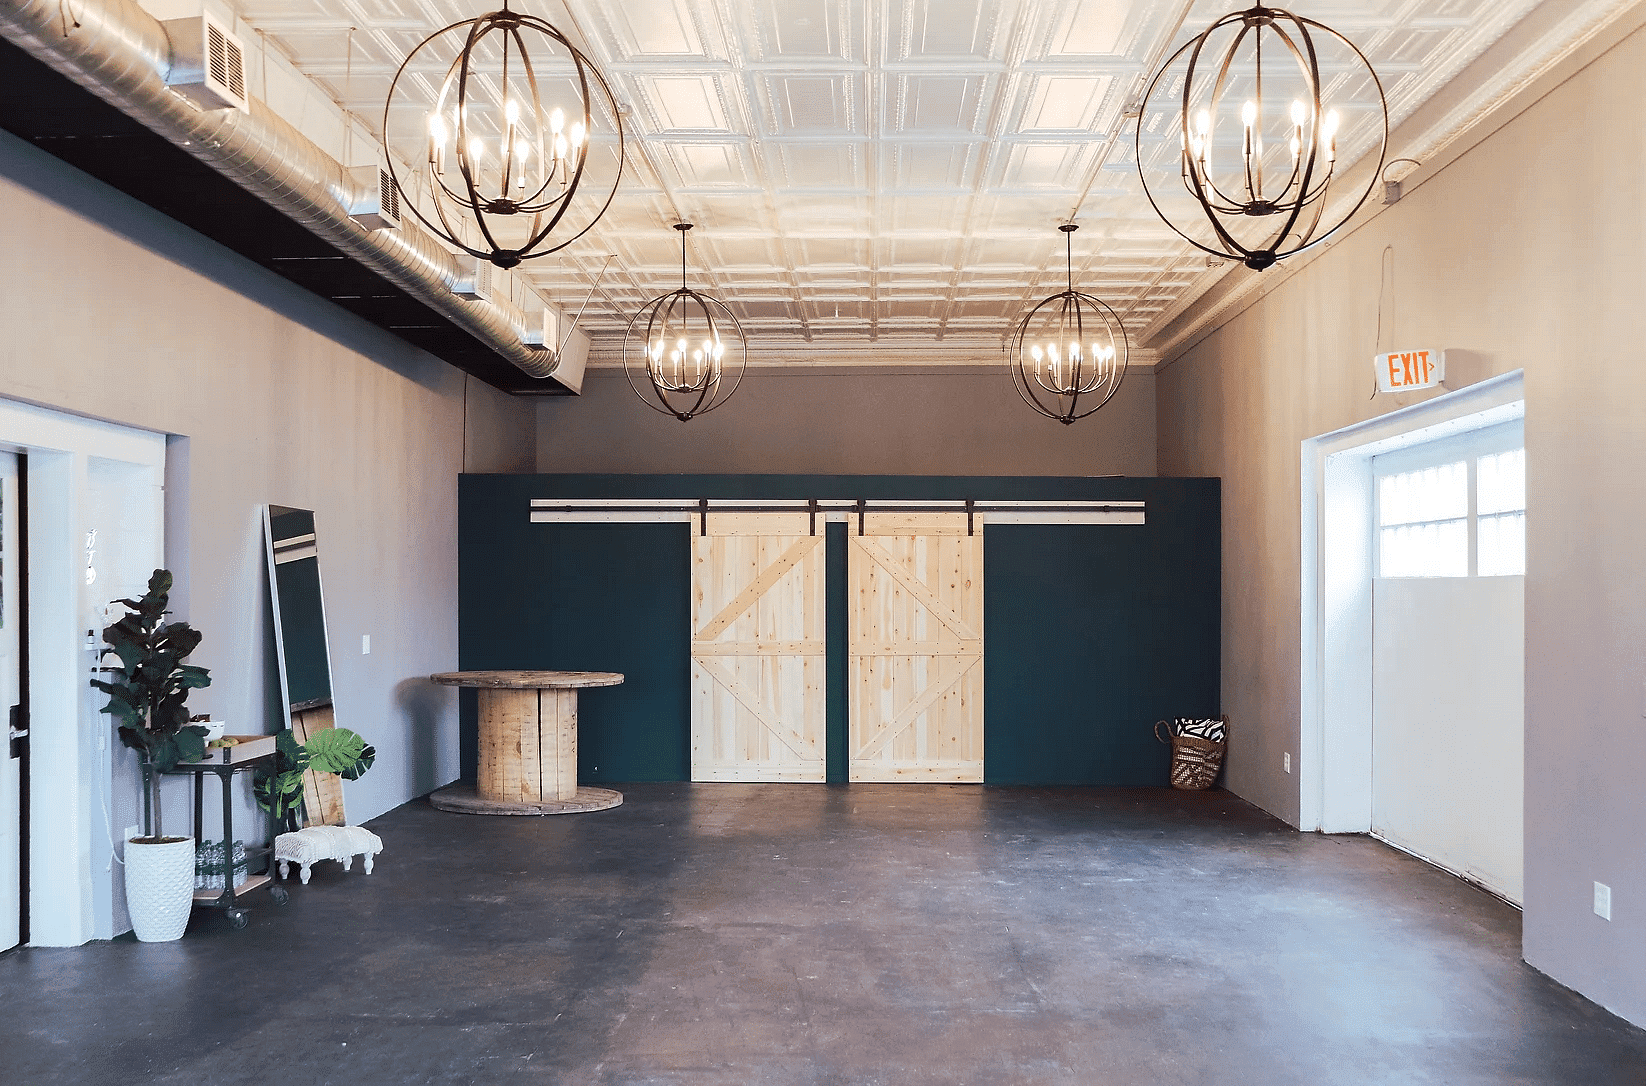 Empty industrial-style room with large chandeliers and wooden doors.